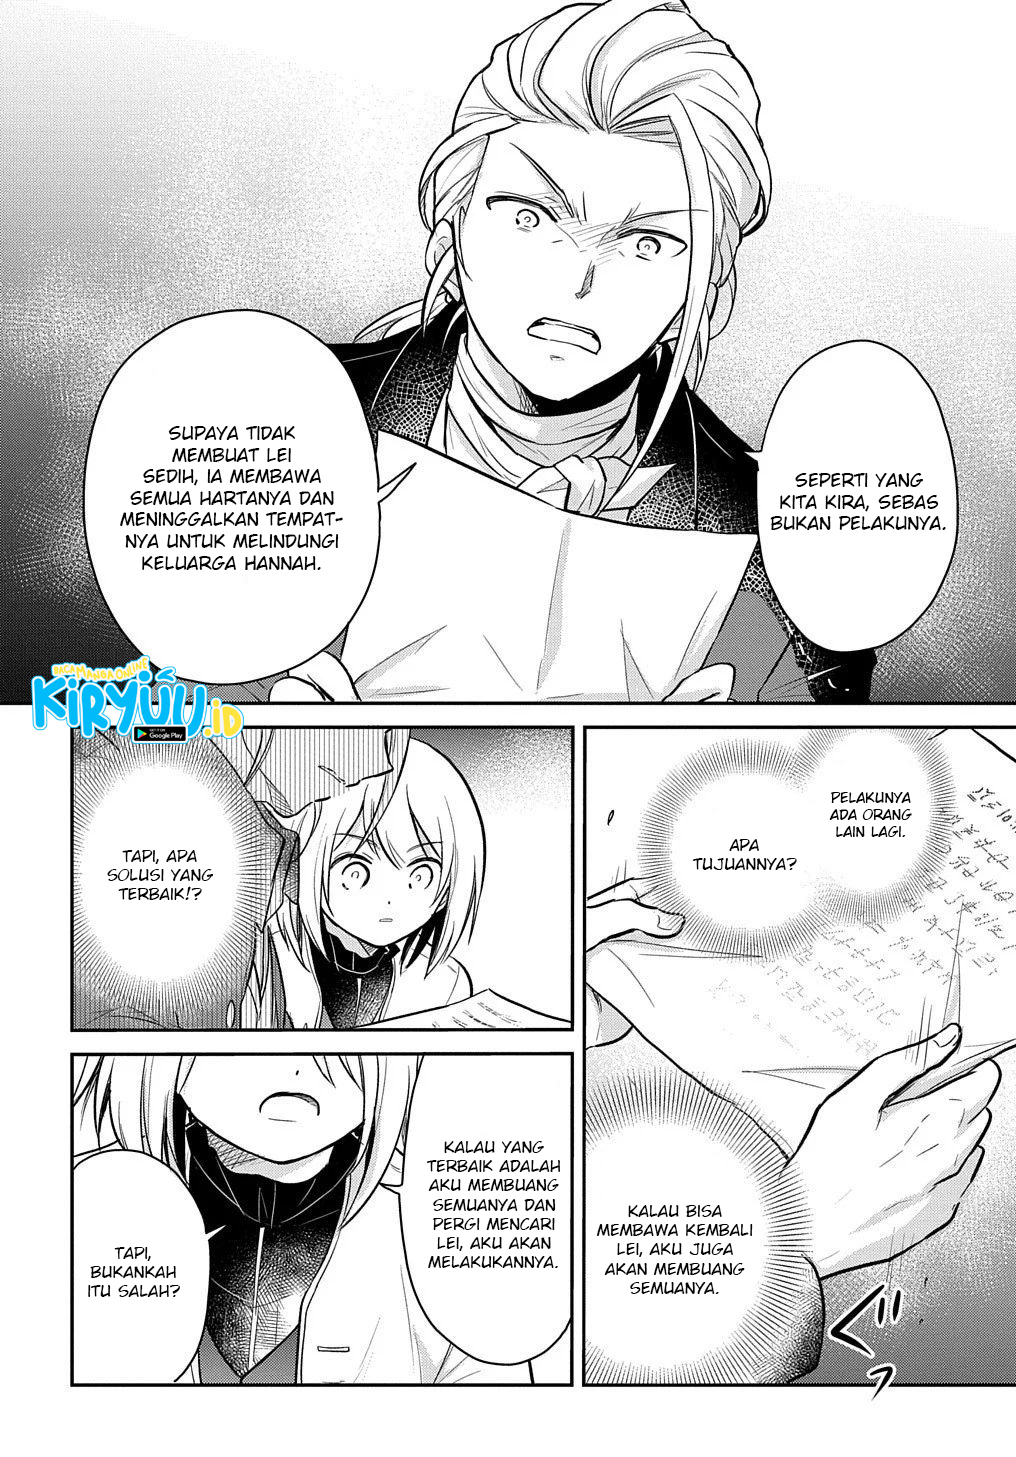 The Reborn Little Girl Won’t Give Up Chapter 07